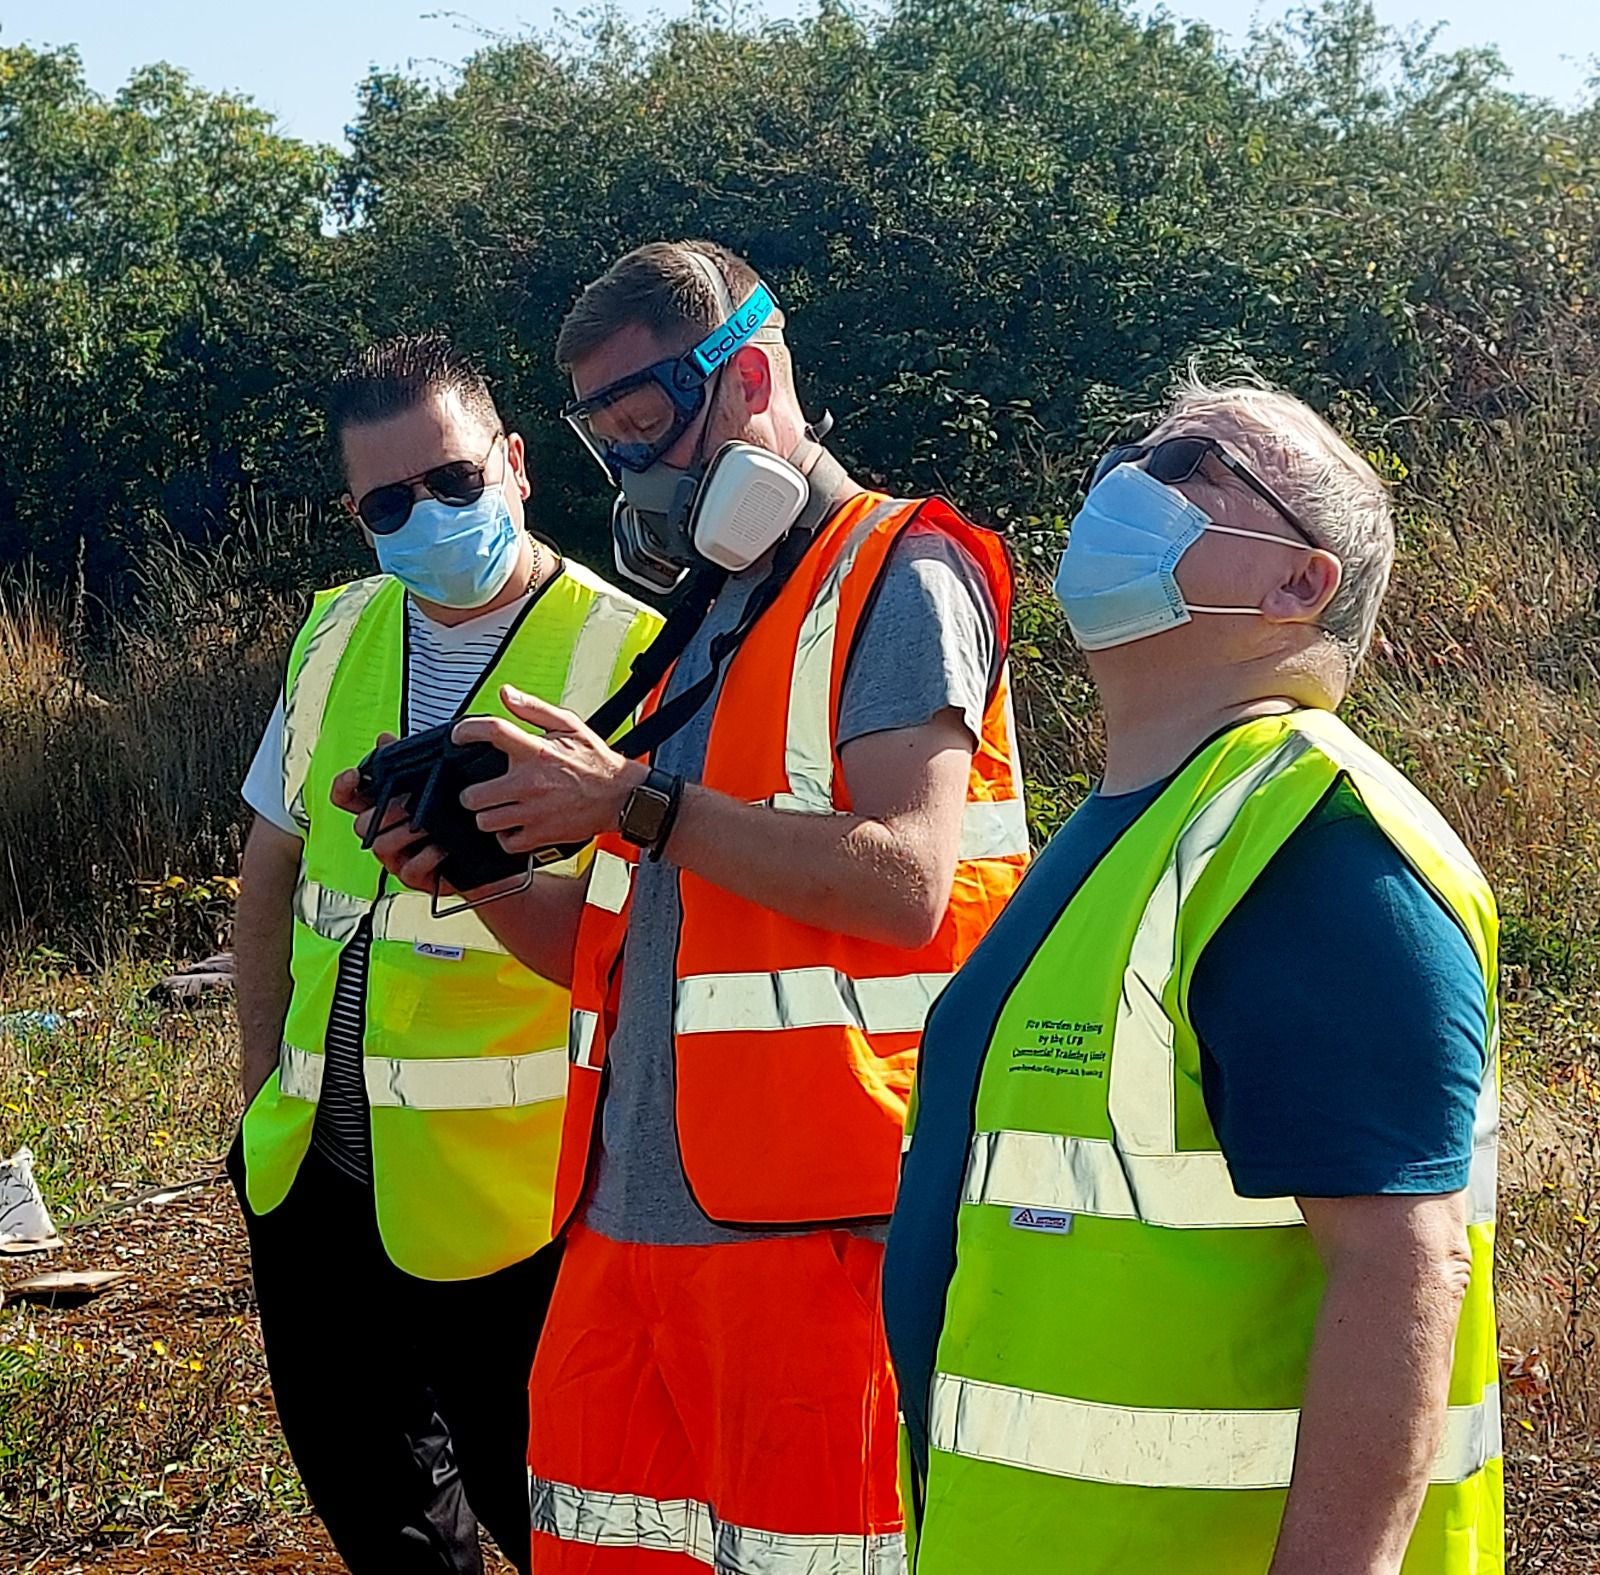 Mark James could feel the heat when he visited with the drone operators on the site